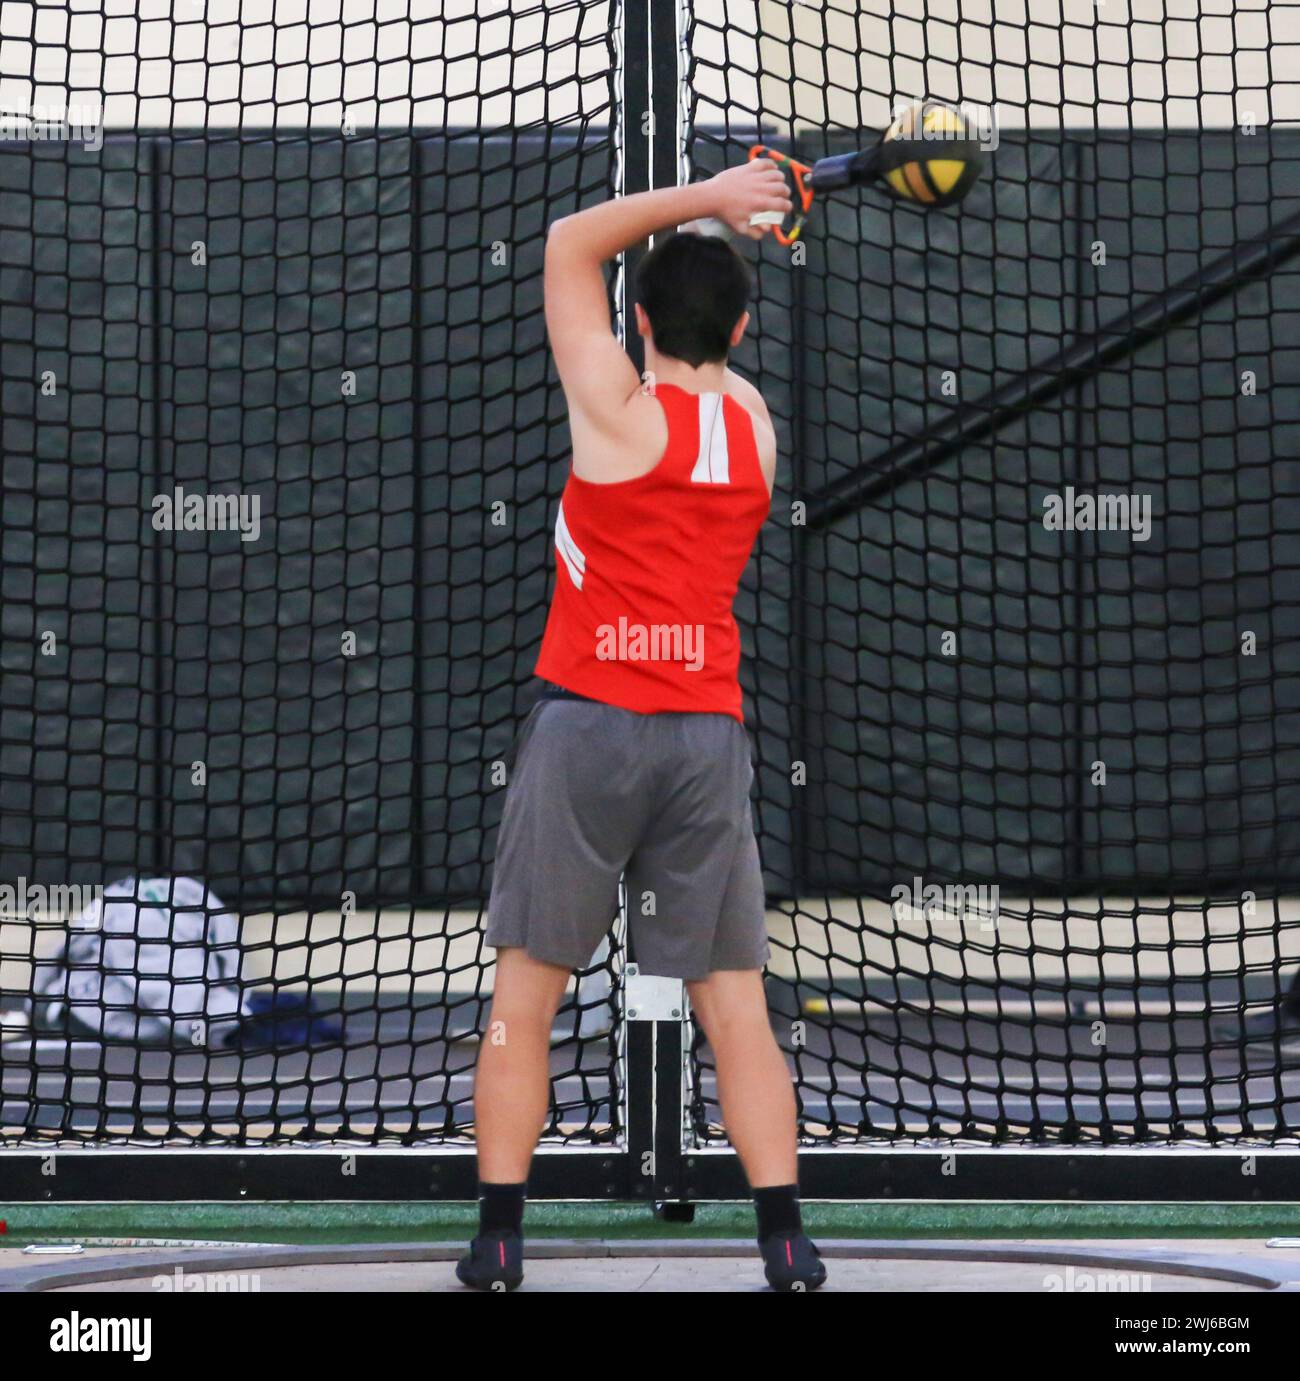 A high school boy spinning a 25 pound weight over his head while competing in the weight throw. Stock Photo